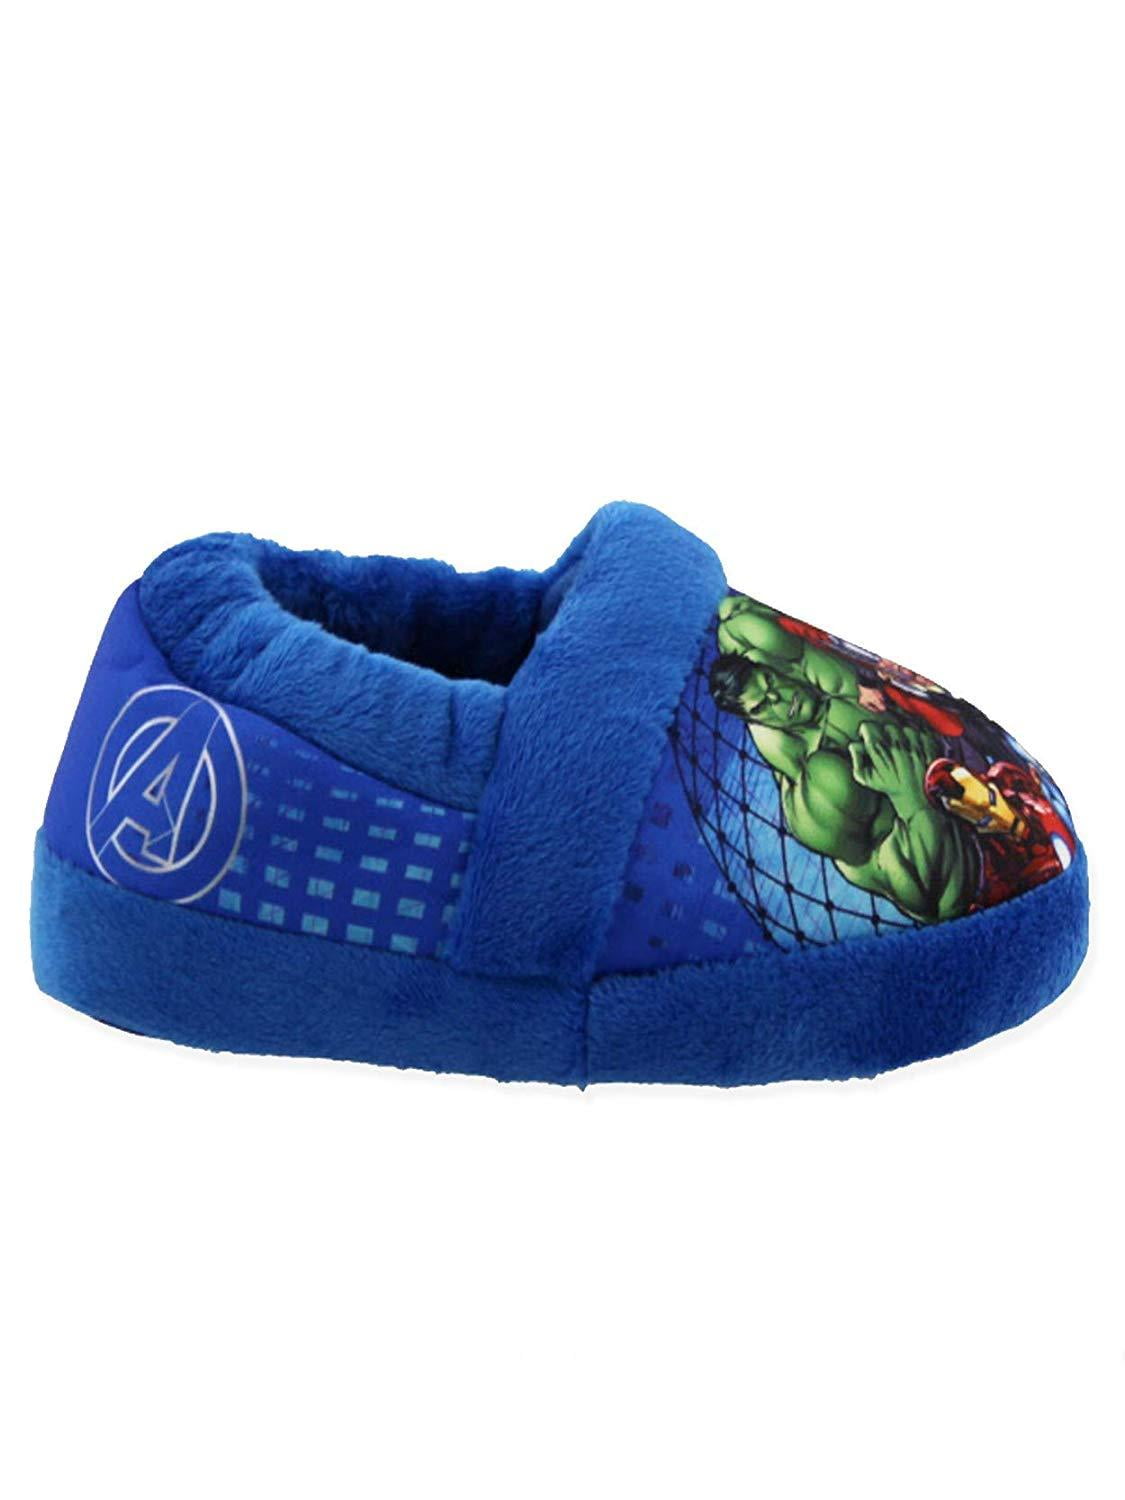 Marvel Avengers Slippers Boys Kids Comic House Shoes Loafers 